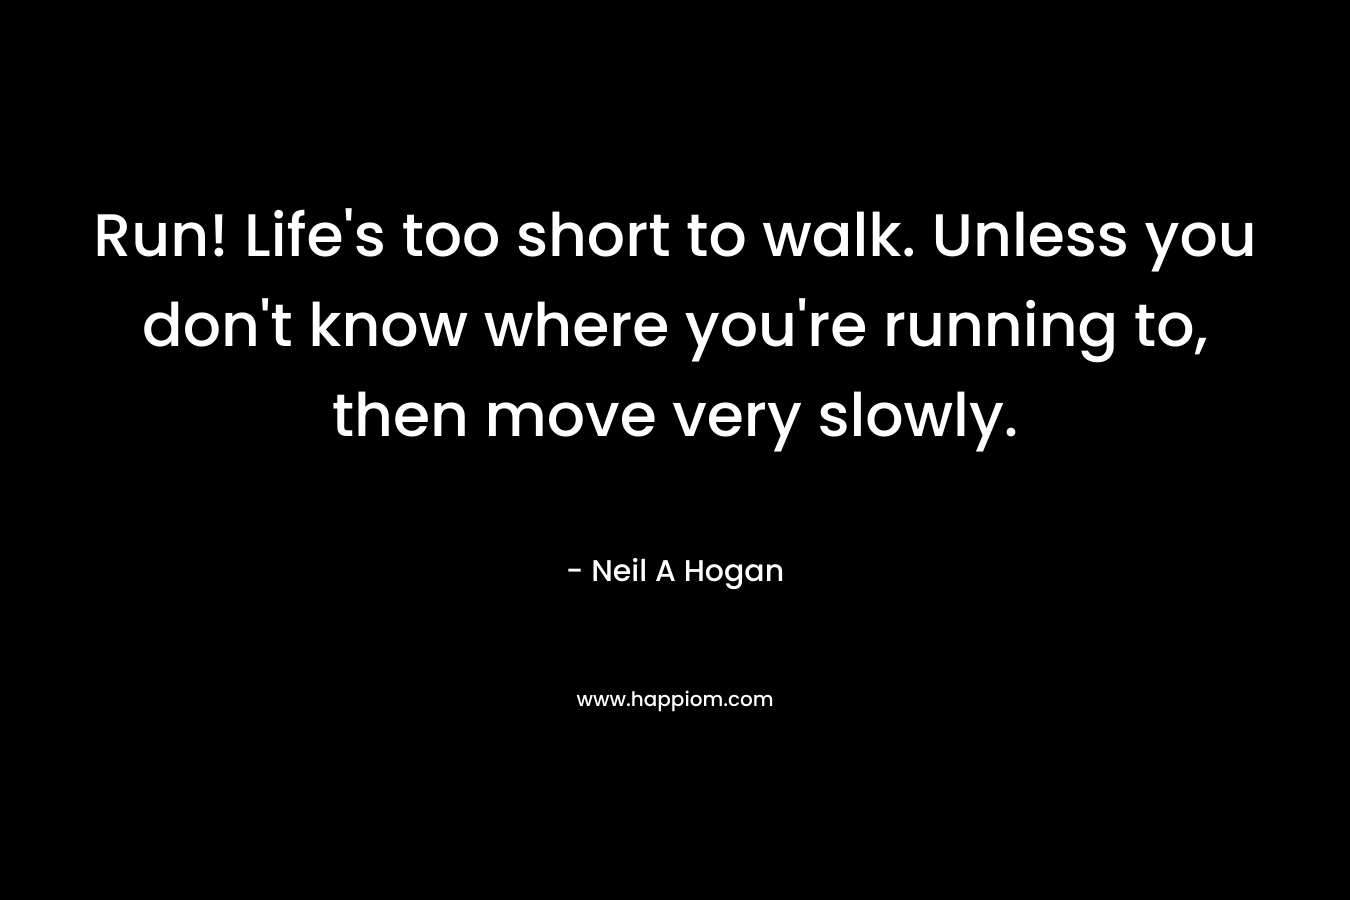 Run! Life's too short to walk. Unless you don't know where you're running to, then move very slowly.